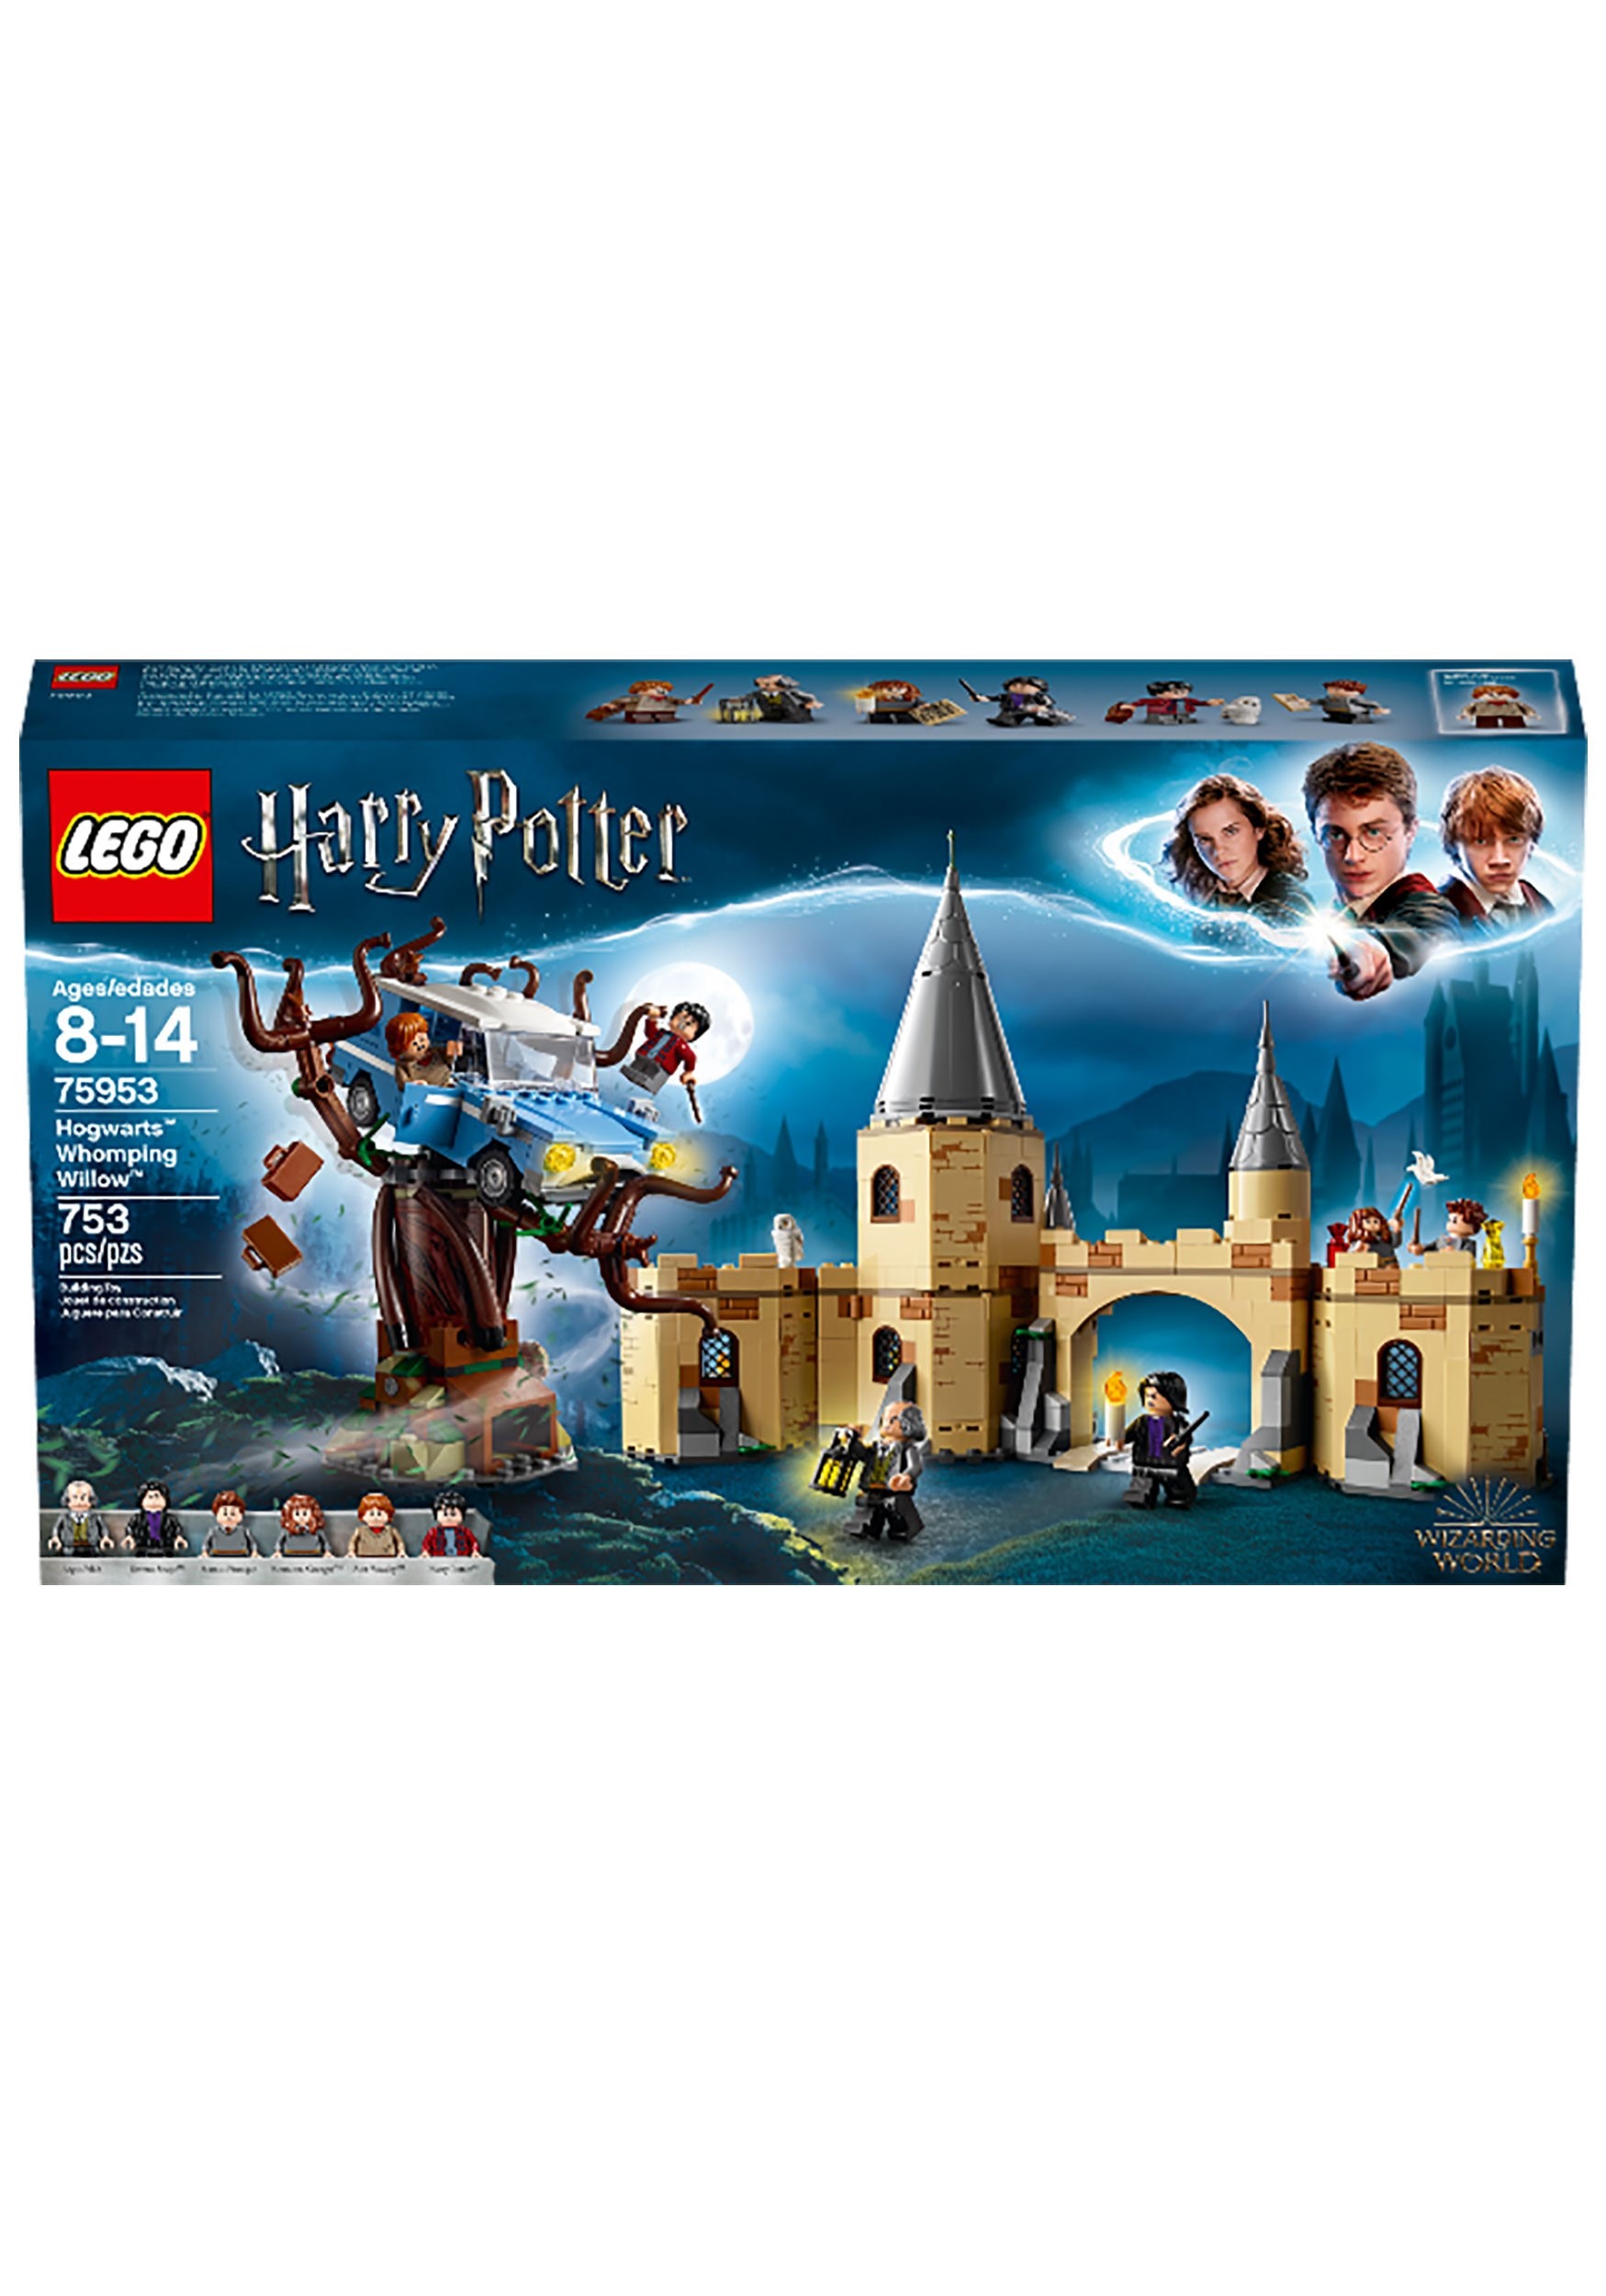 Whomping Willow Harry Potter LEGO Hogwarts Building Set